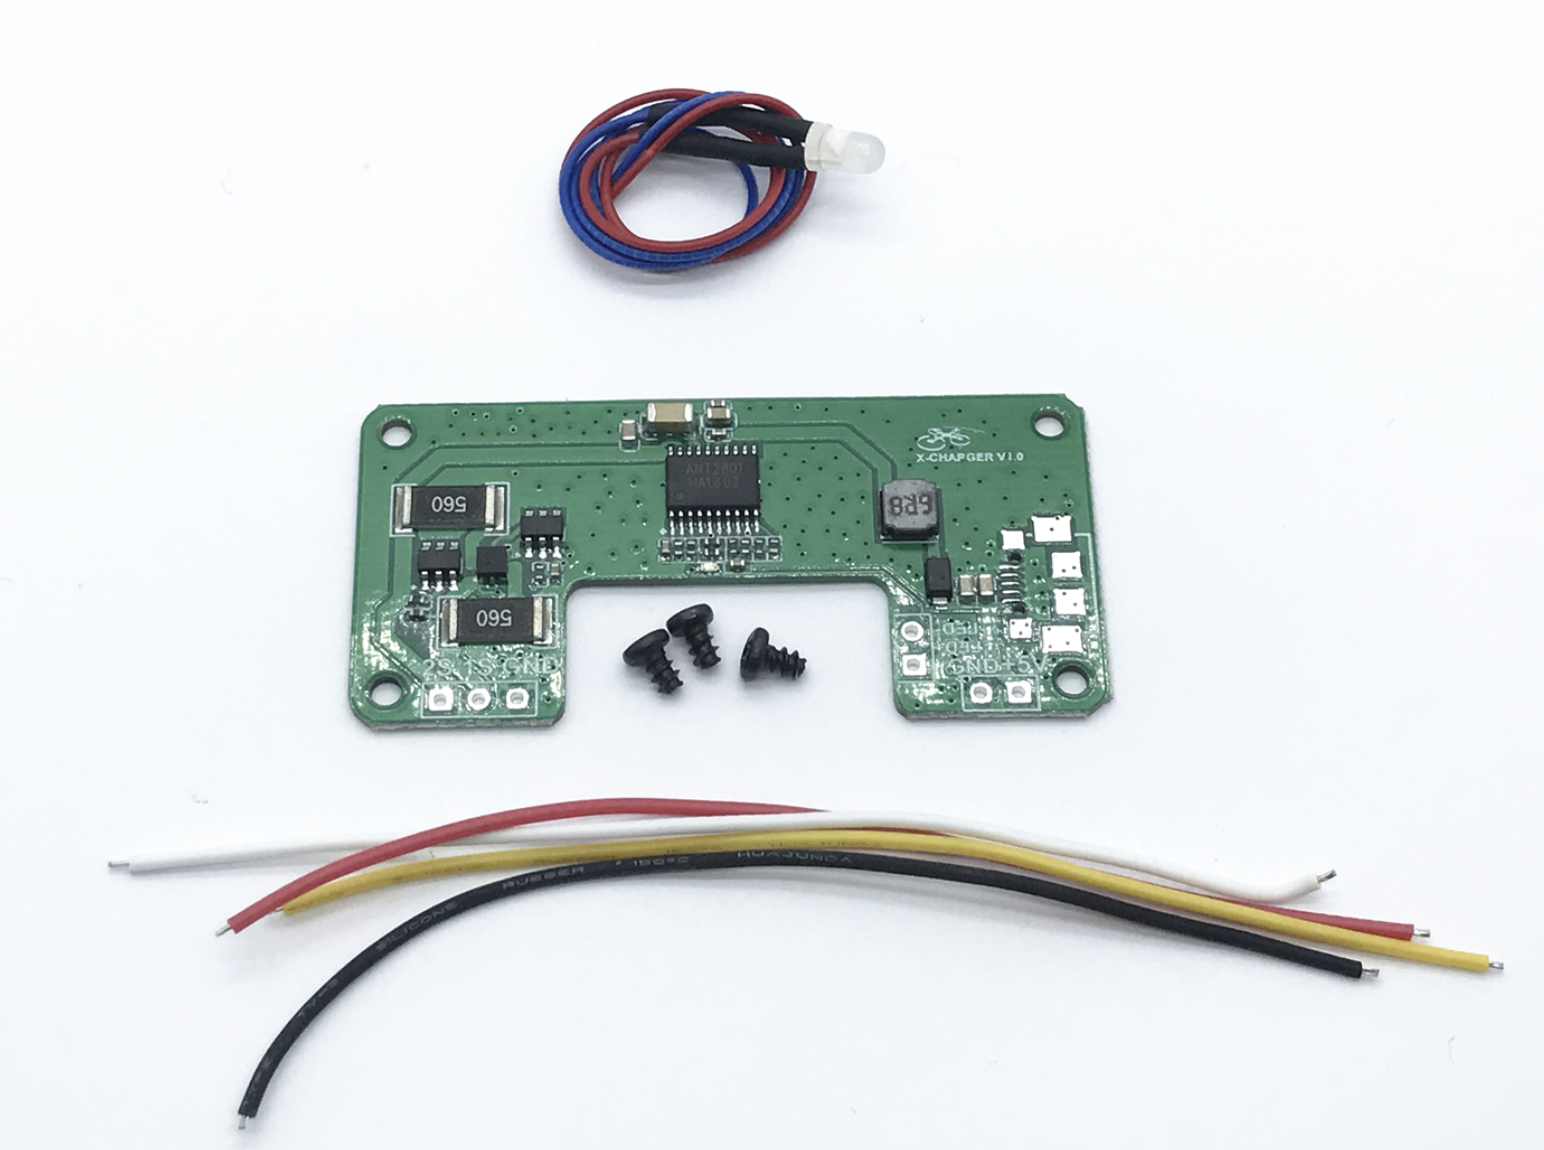 Full Speed X-Charger Module for FrSky X-lite controller